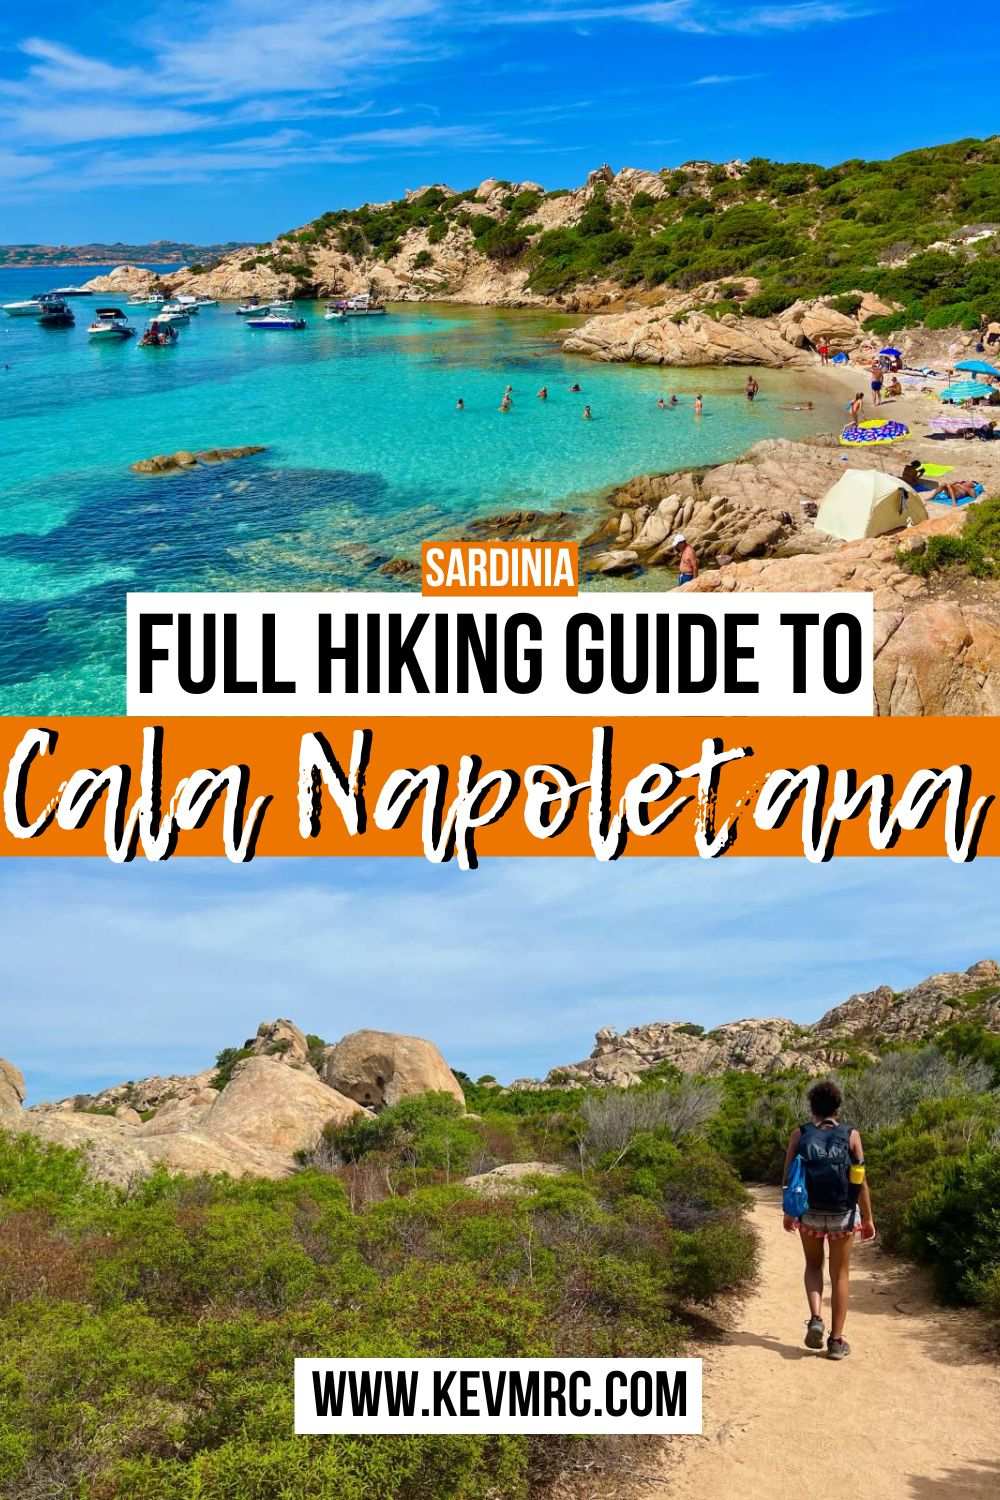 Find out all the details, info and tips you need to hike Cala Napoletana, one of the most beautiful beaches in La Maddalena, Sardinia. sardinia la maddalena | la maddalena archipelago, sardinia | la maddalena beaches | caprera island italy | sardinia beach beautiful places | best beaches in sardinia #lamaddalena #caprera #sardinia #calanapoletana